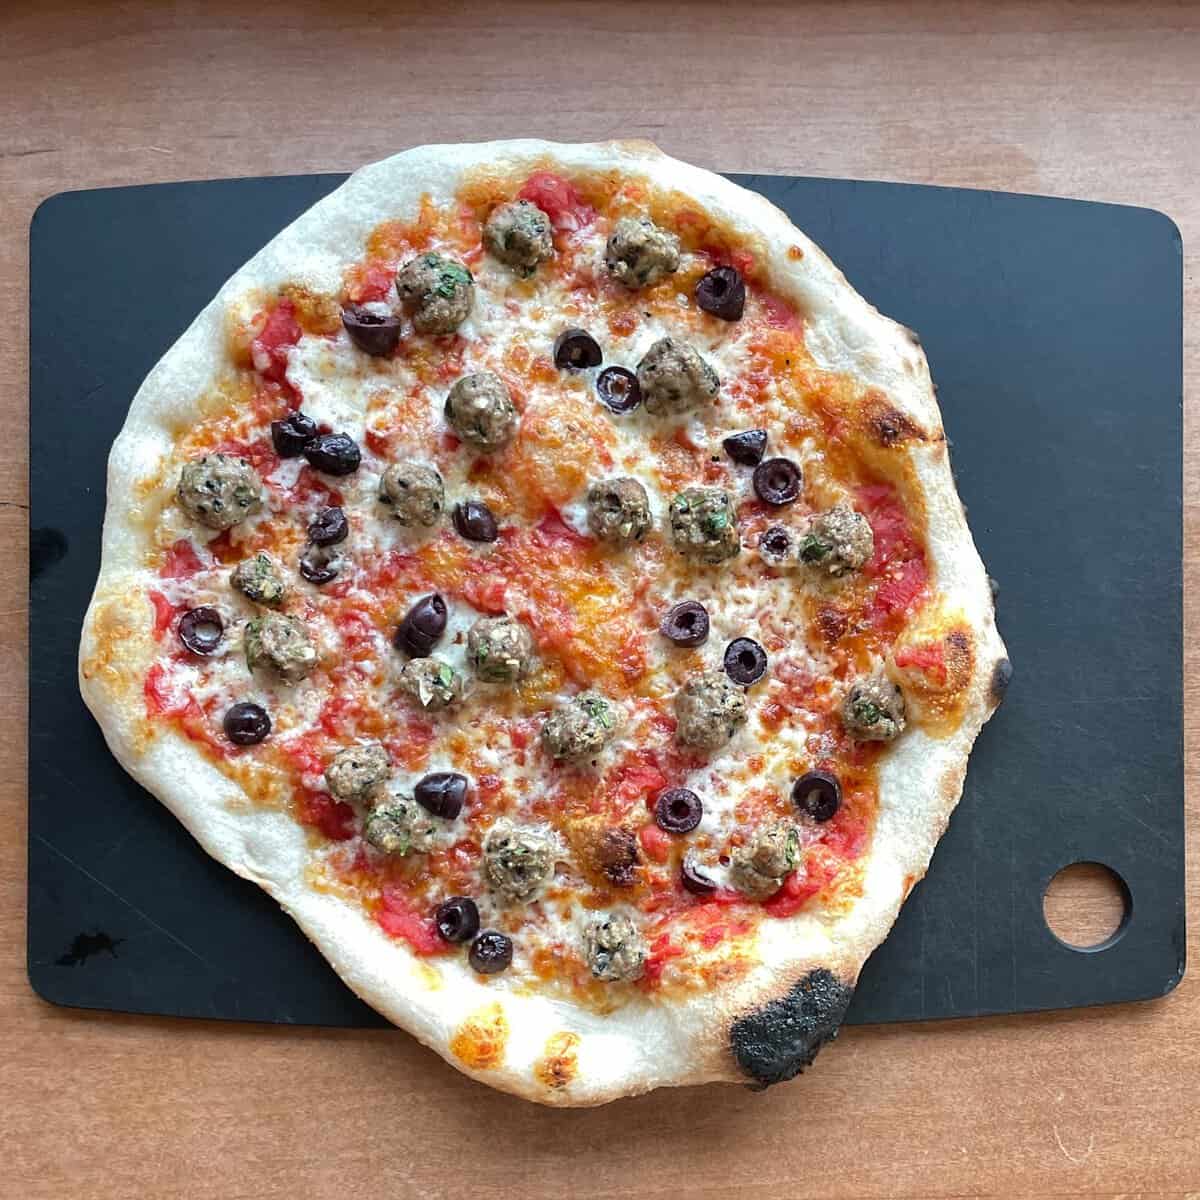 large pizza topped with tomato sauce, meatballs, and olives.